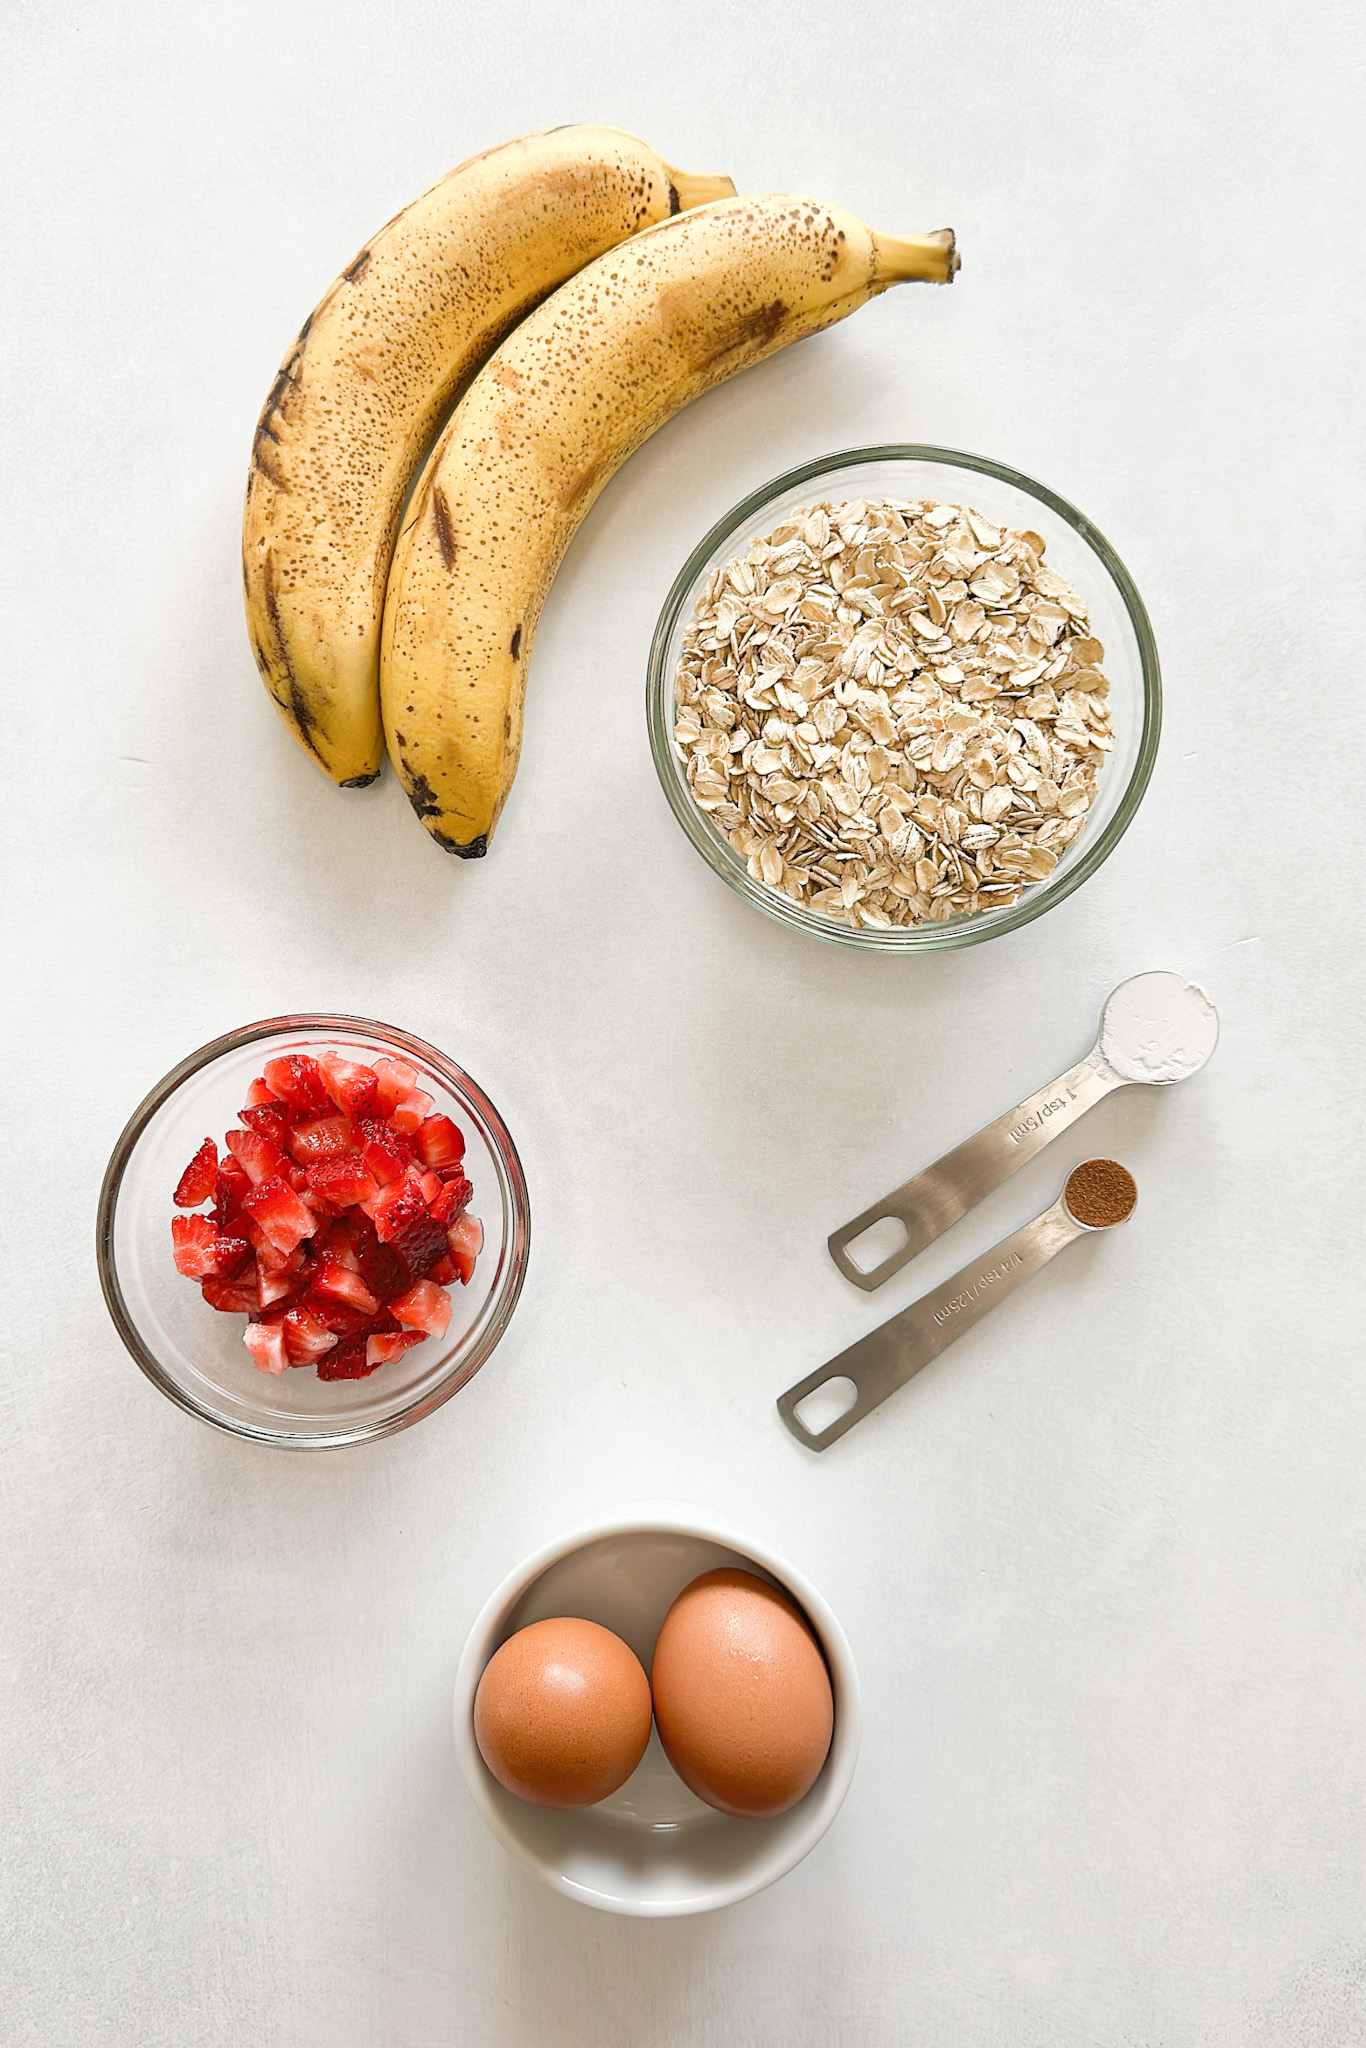 Ingredients to make strawberry banana oatmeal muffins.